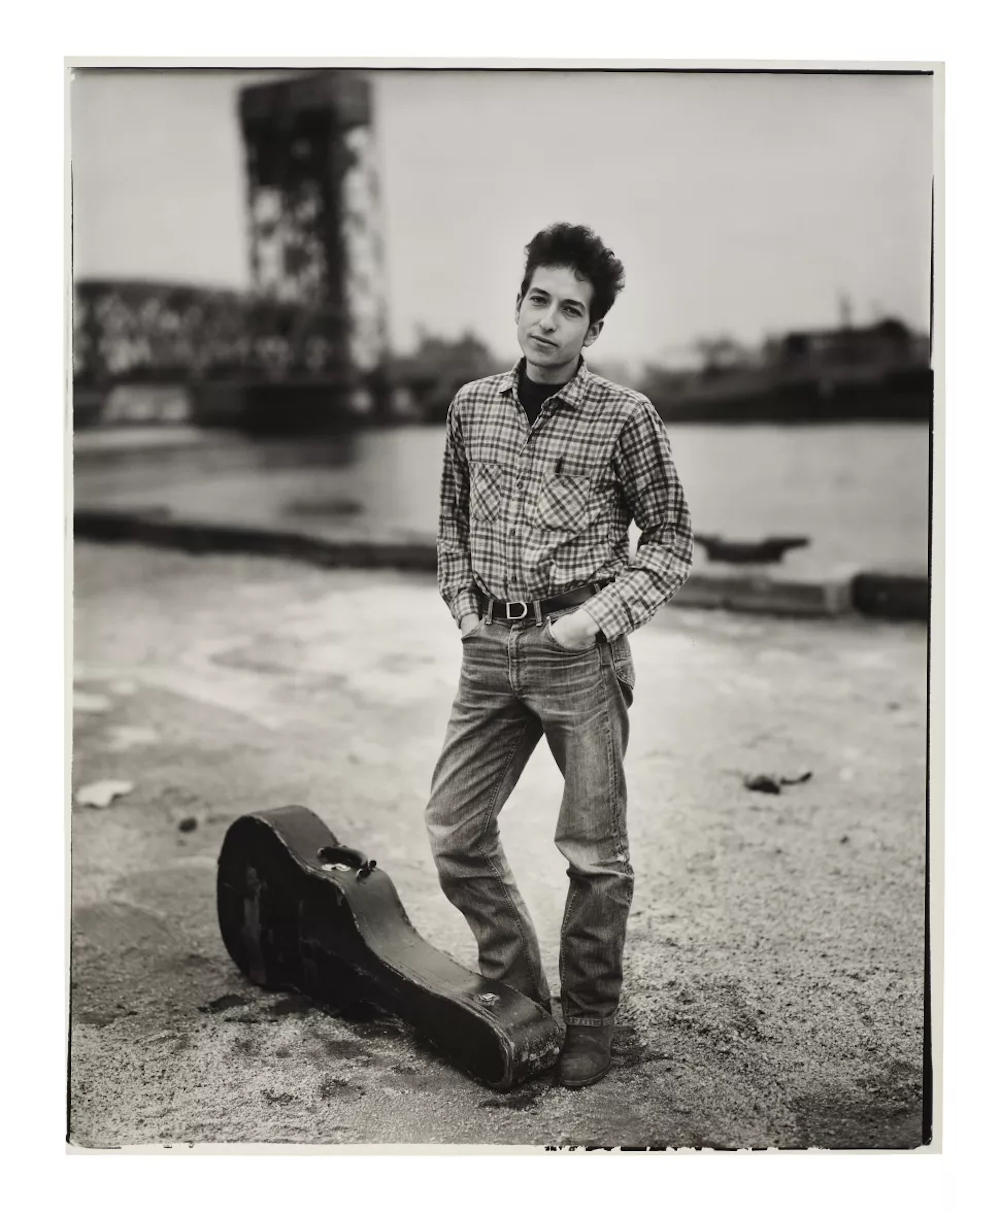 Richard Avedon (1923-2004), Bob Dylan, Folk Singer, New York City, 1963. Gelatin silver print, printed 1967. Image/sheet: 19⅞x16in. Estimate: $60,000-80,000. Offered in Photographs from the Richard Gere Collection on 23 March-7 April 2022 at Christie's Online